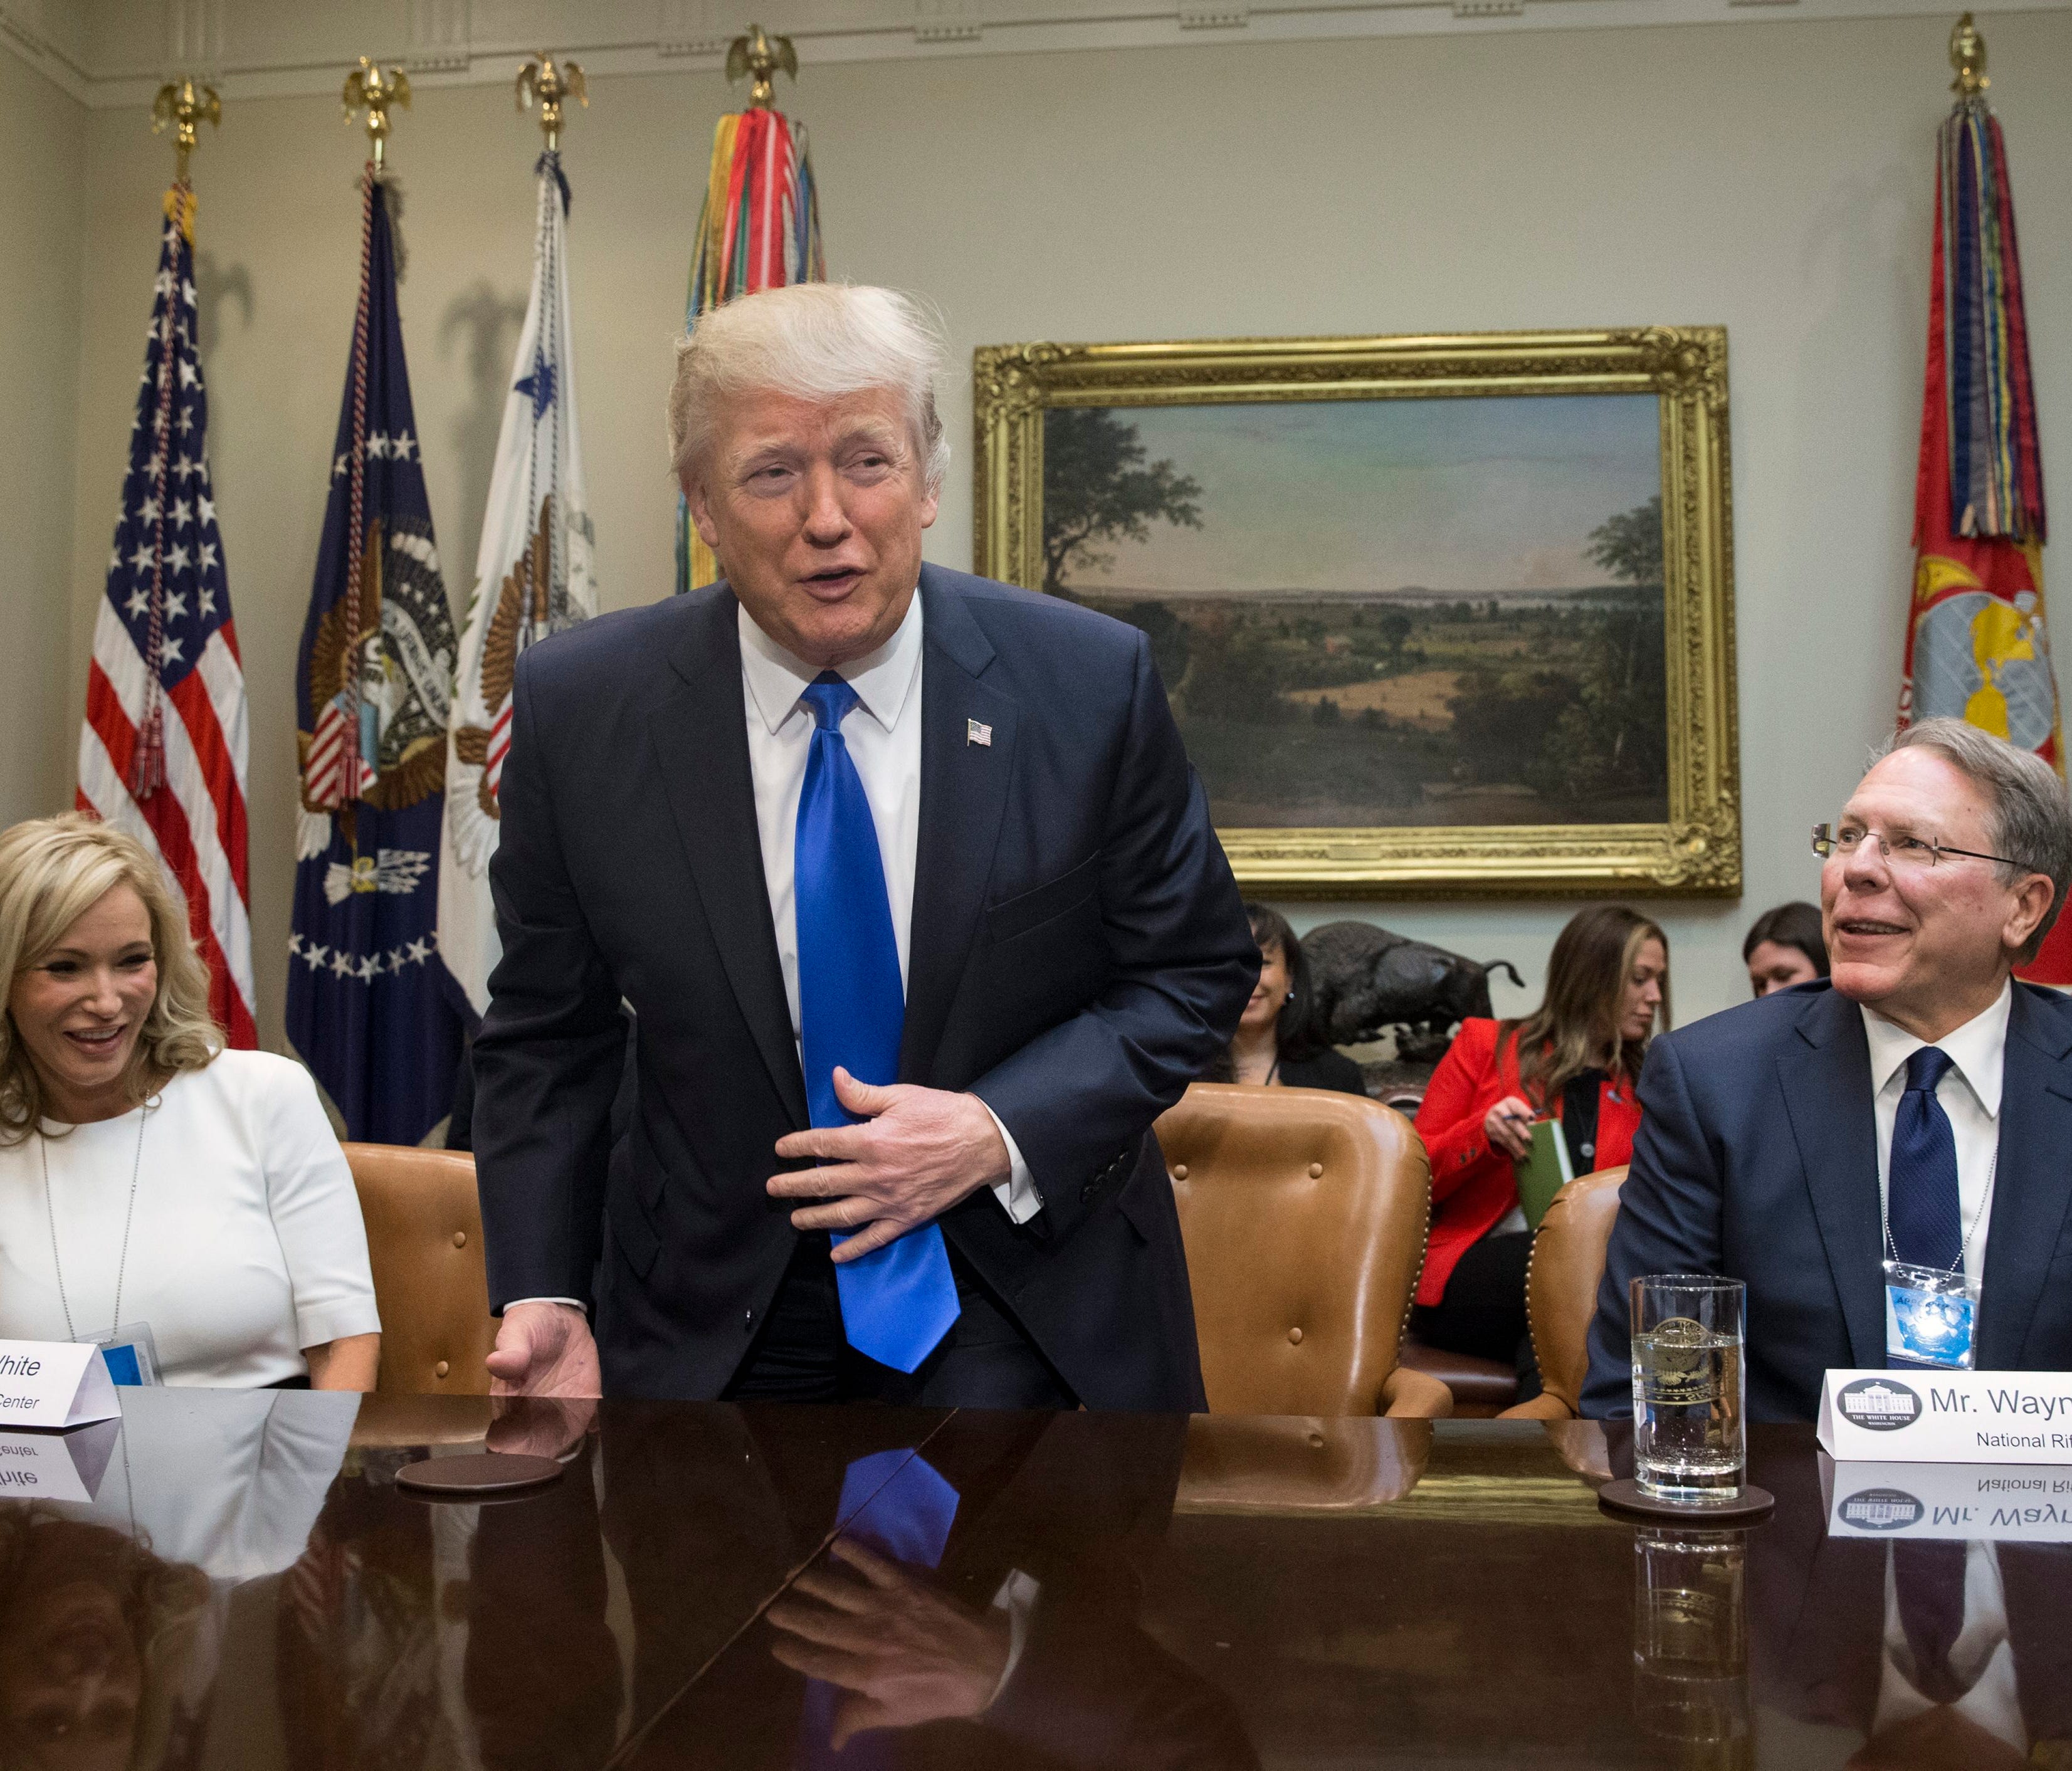 Trump takes his seat between Paula White of the New Destiny Christian Center and NRA Executive Vice President and CEO Wayne LaPierre at a meeting on his nomination of Neil Gorsuch to the Supreme Court in the Roosevelt Room on Feb. 1, 2017.